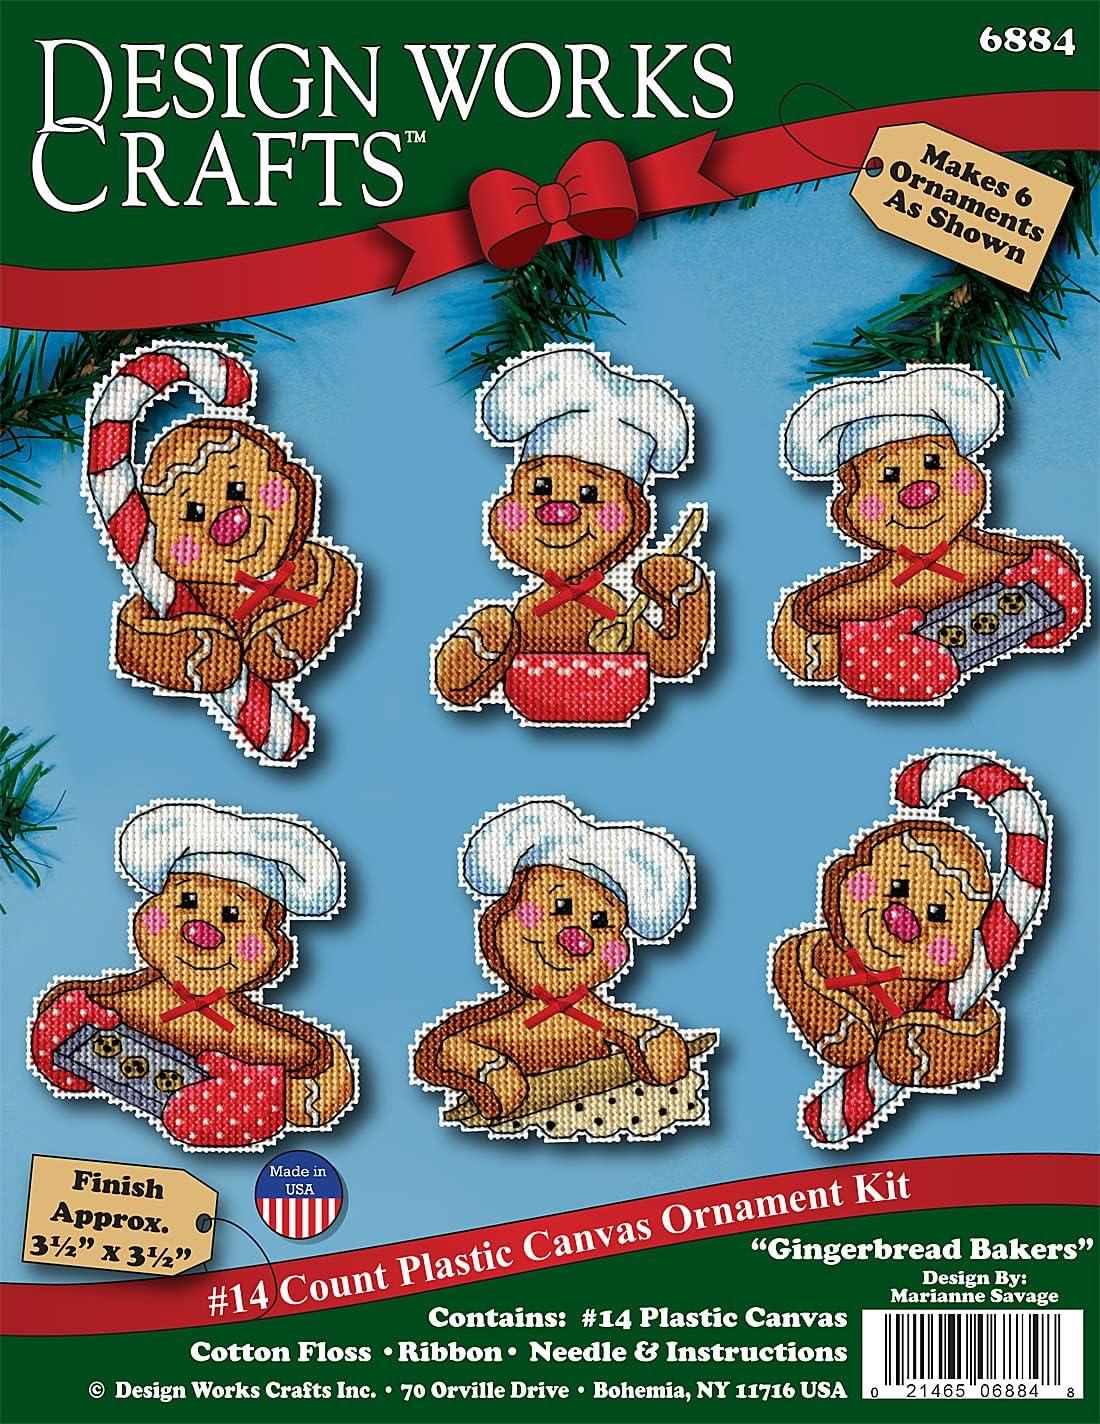 Design Works Crafts Counted Cross Stitch Ornament Kit, Gingerbread